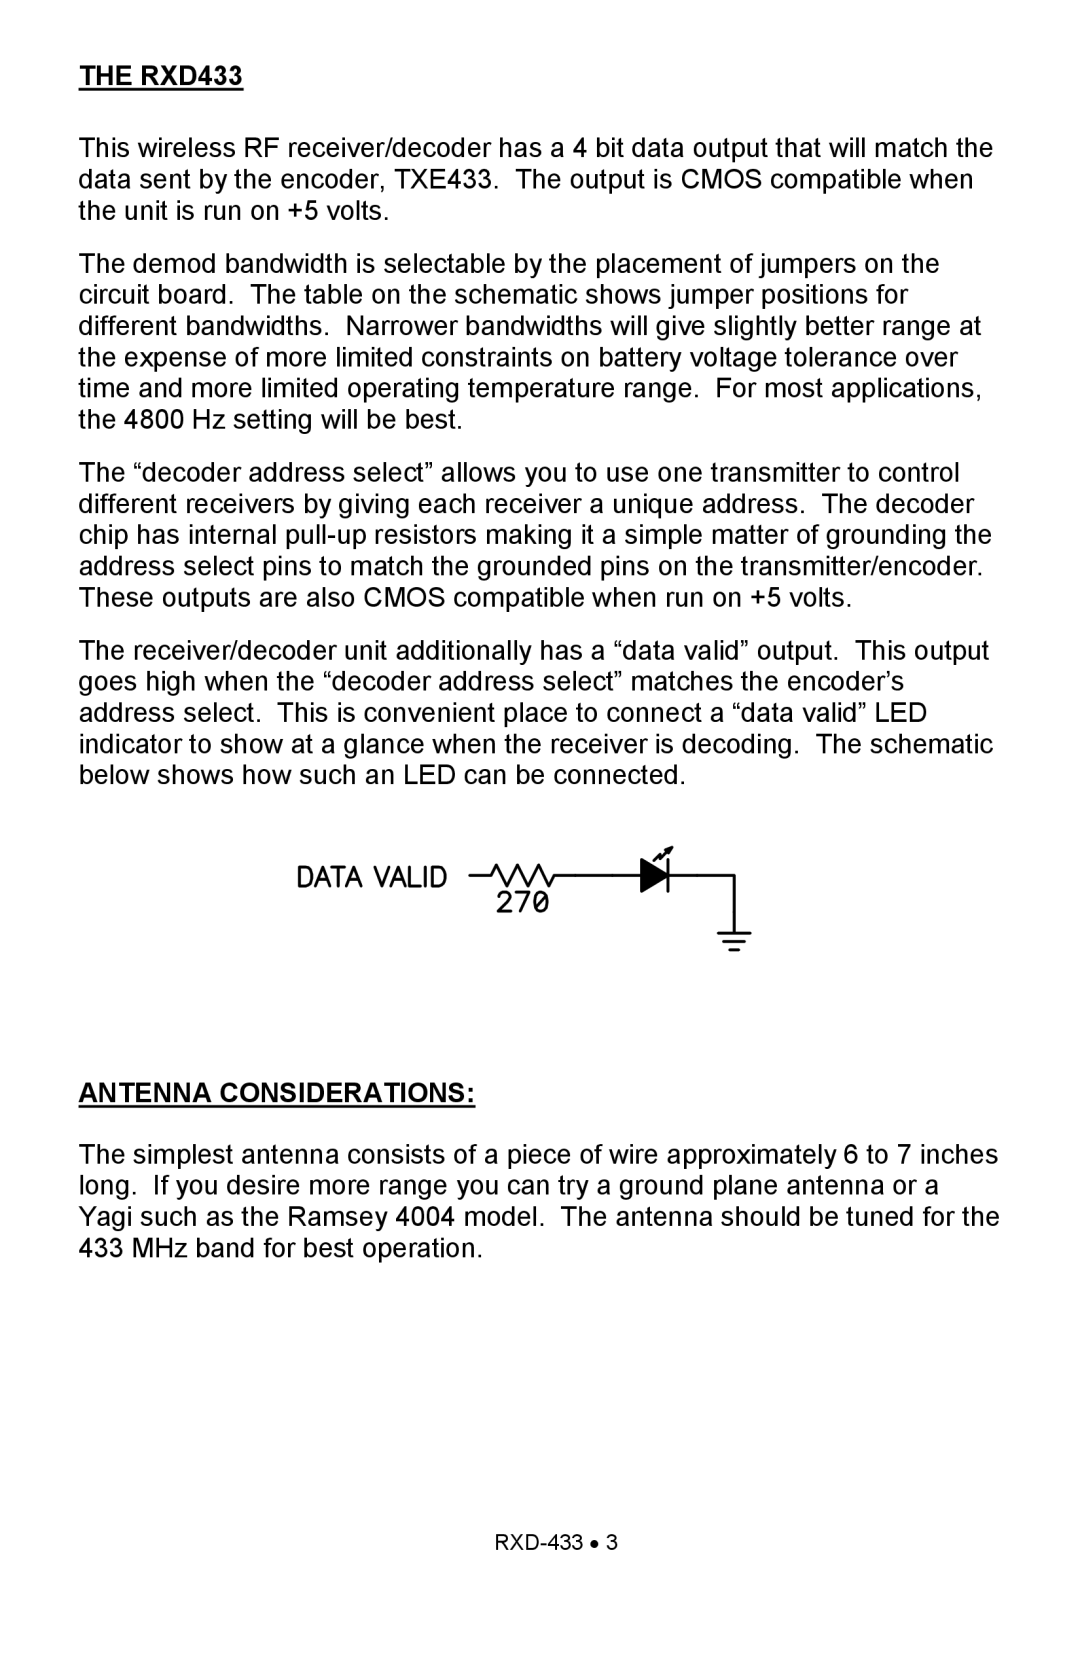 Ramsey Electronics manual THE RXD433, Antenna Considerations 